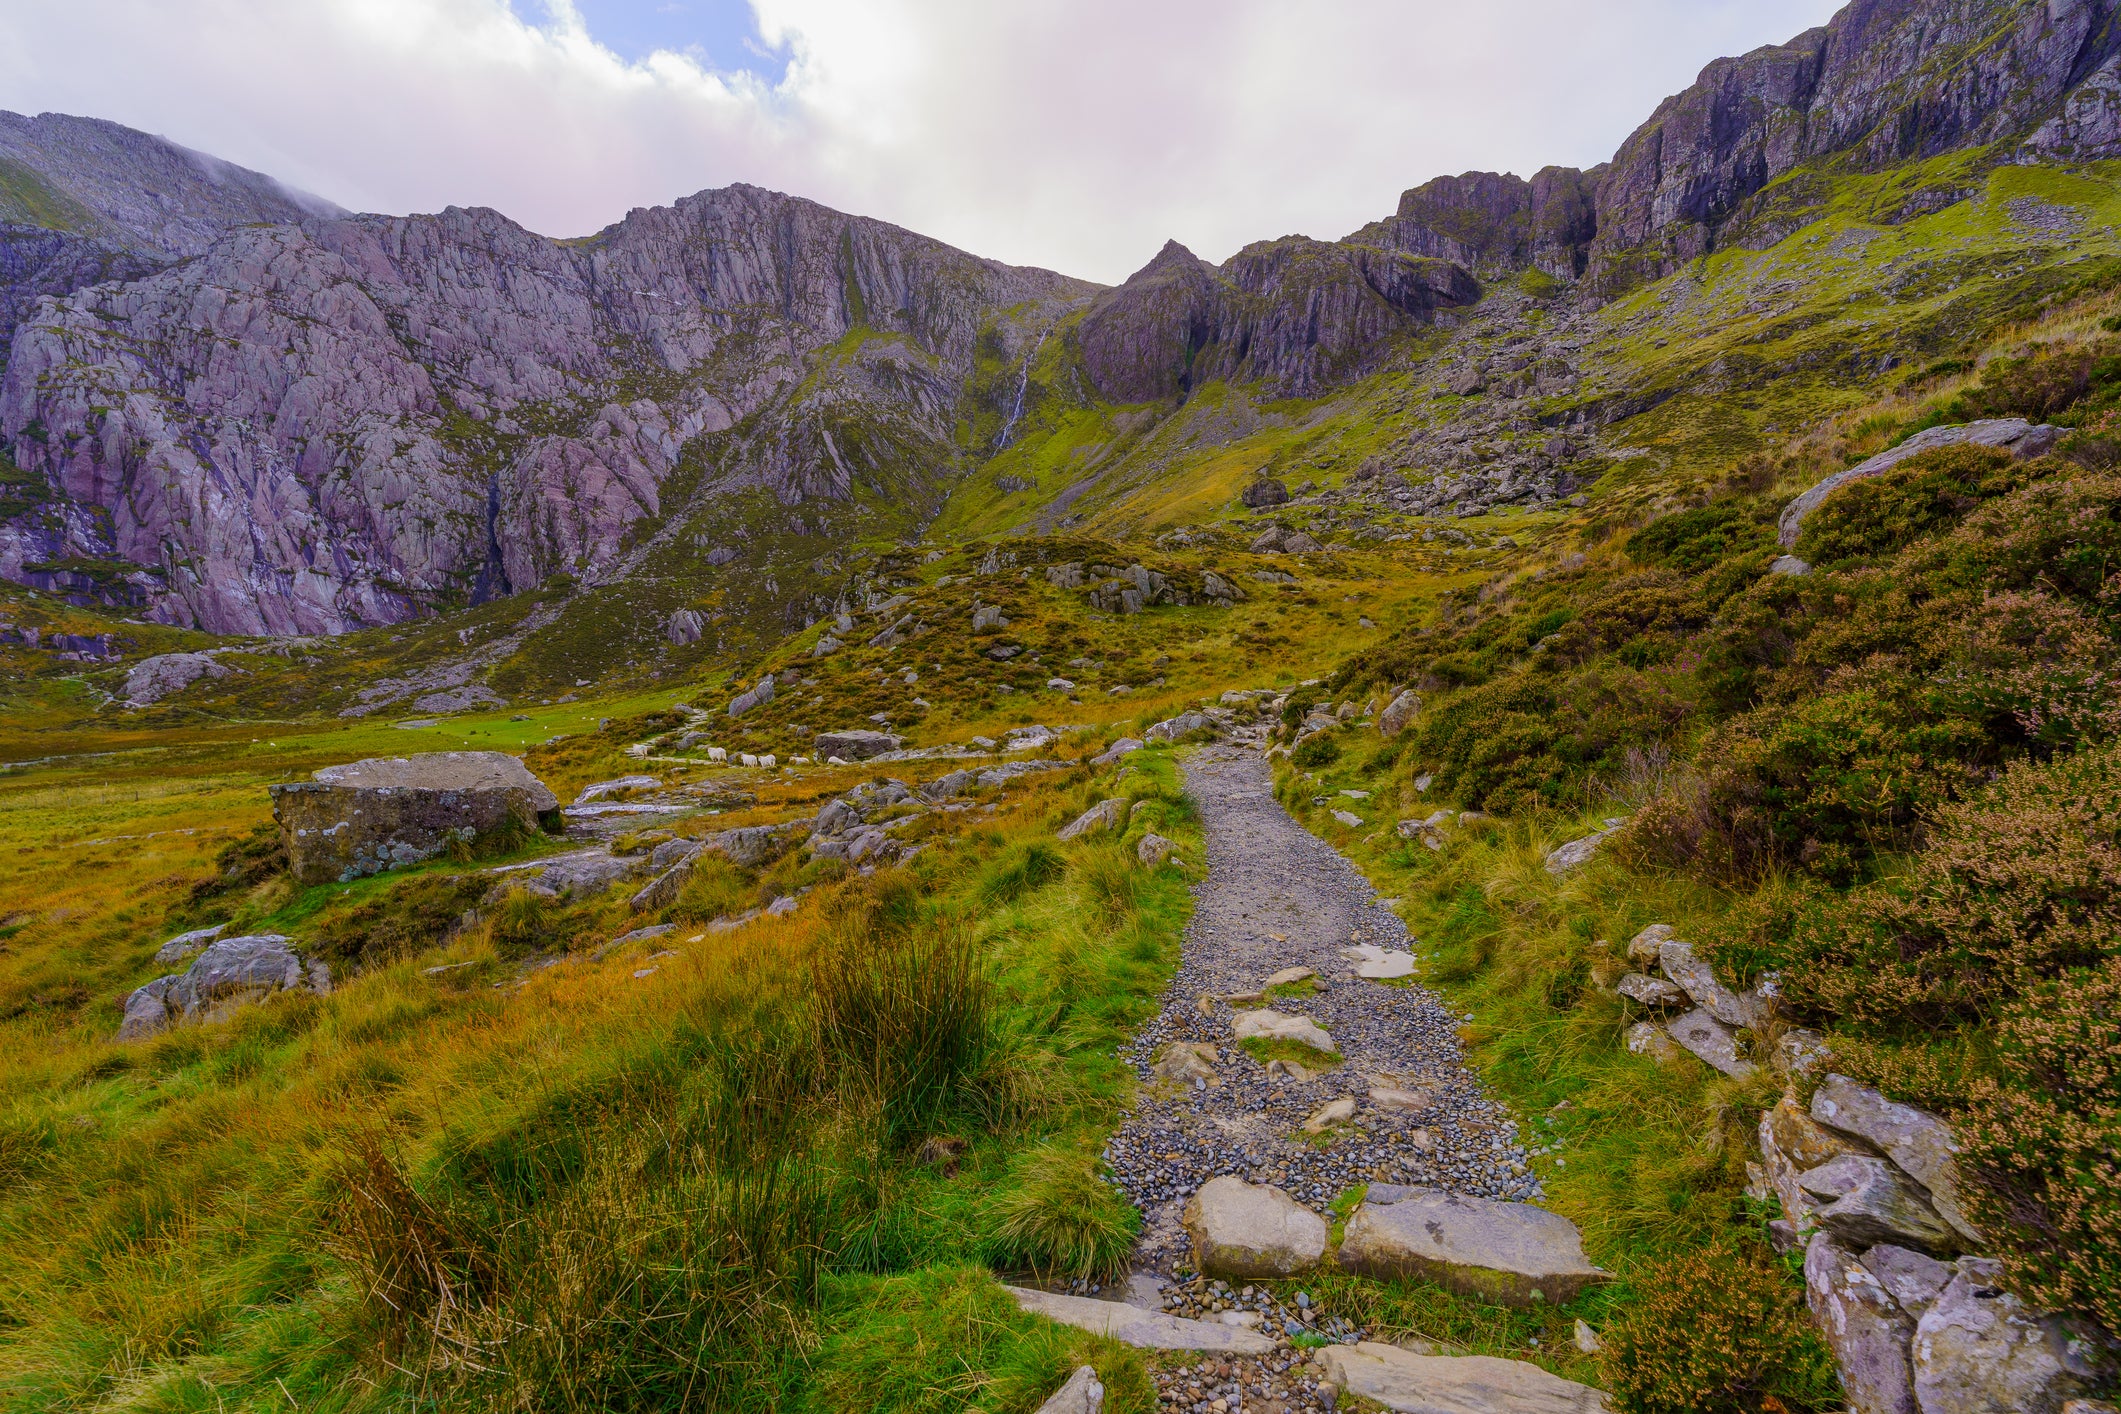 It’s an 83-mile circular route from Bangor to Bethesda on the Snowdonia Slate Trail